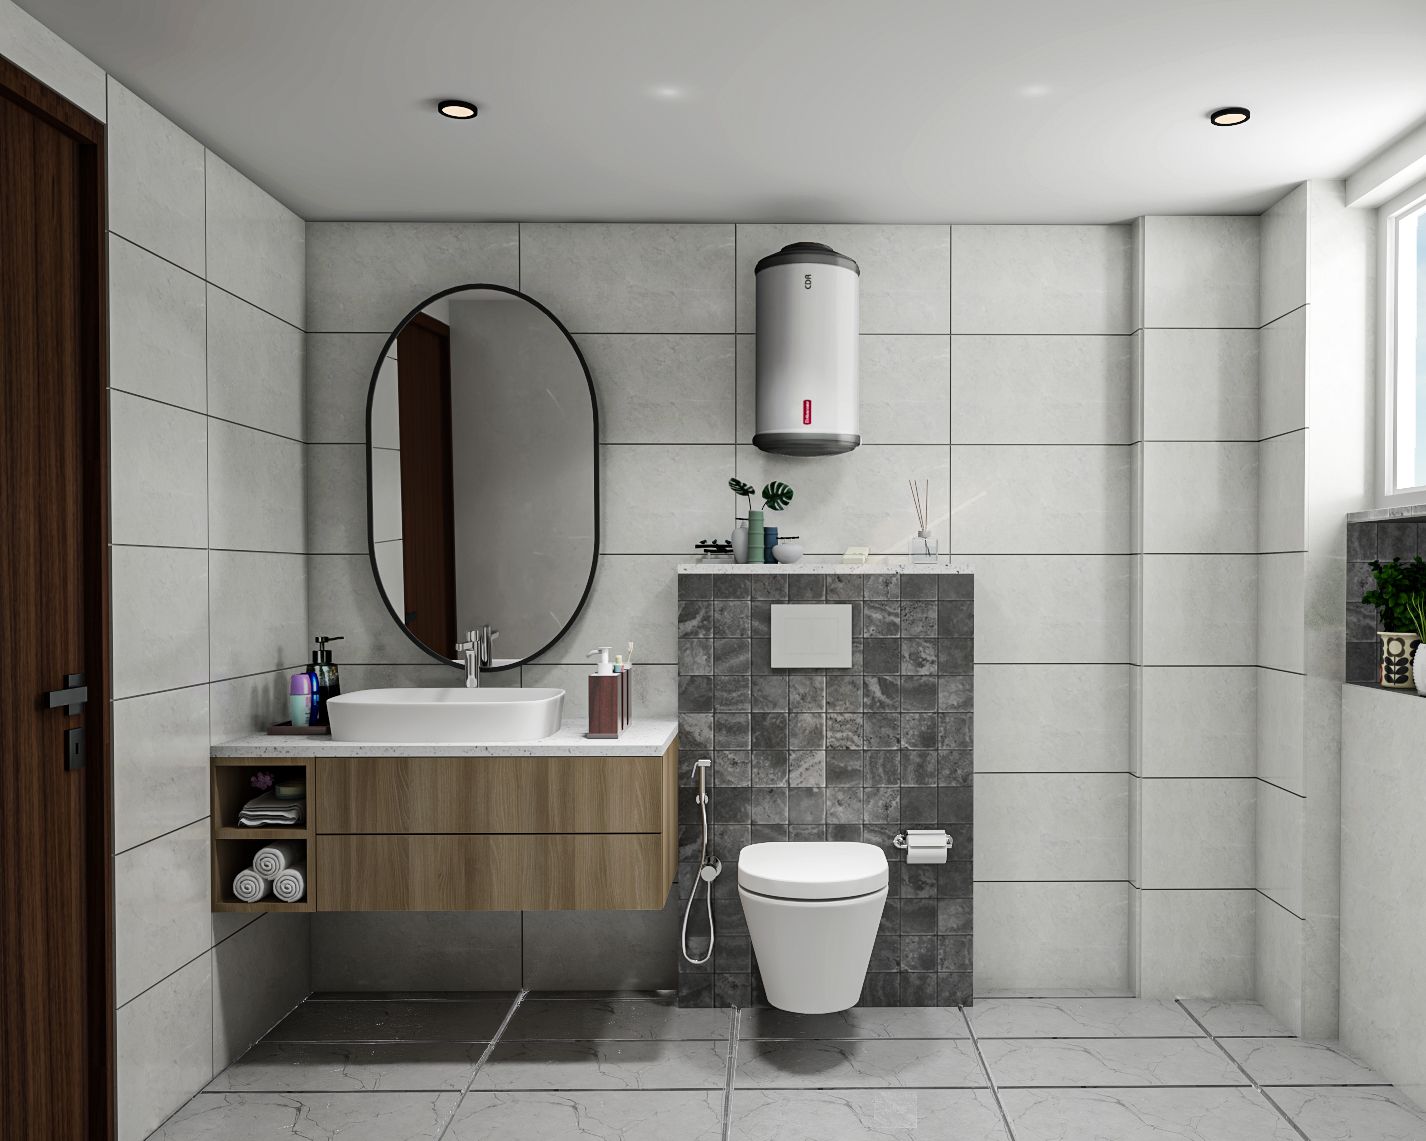 Modern Bathroom Design With Drawers And Open Storage Units